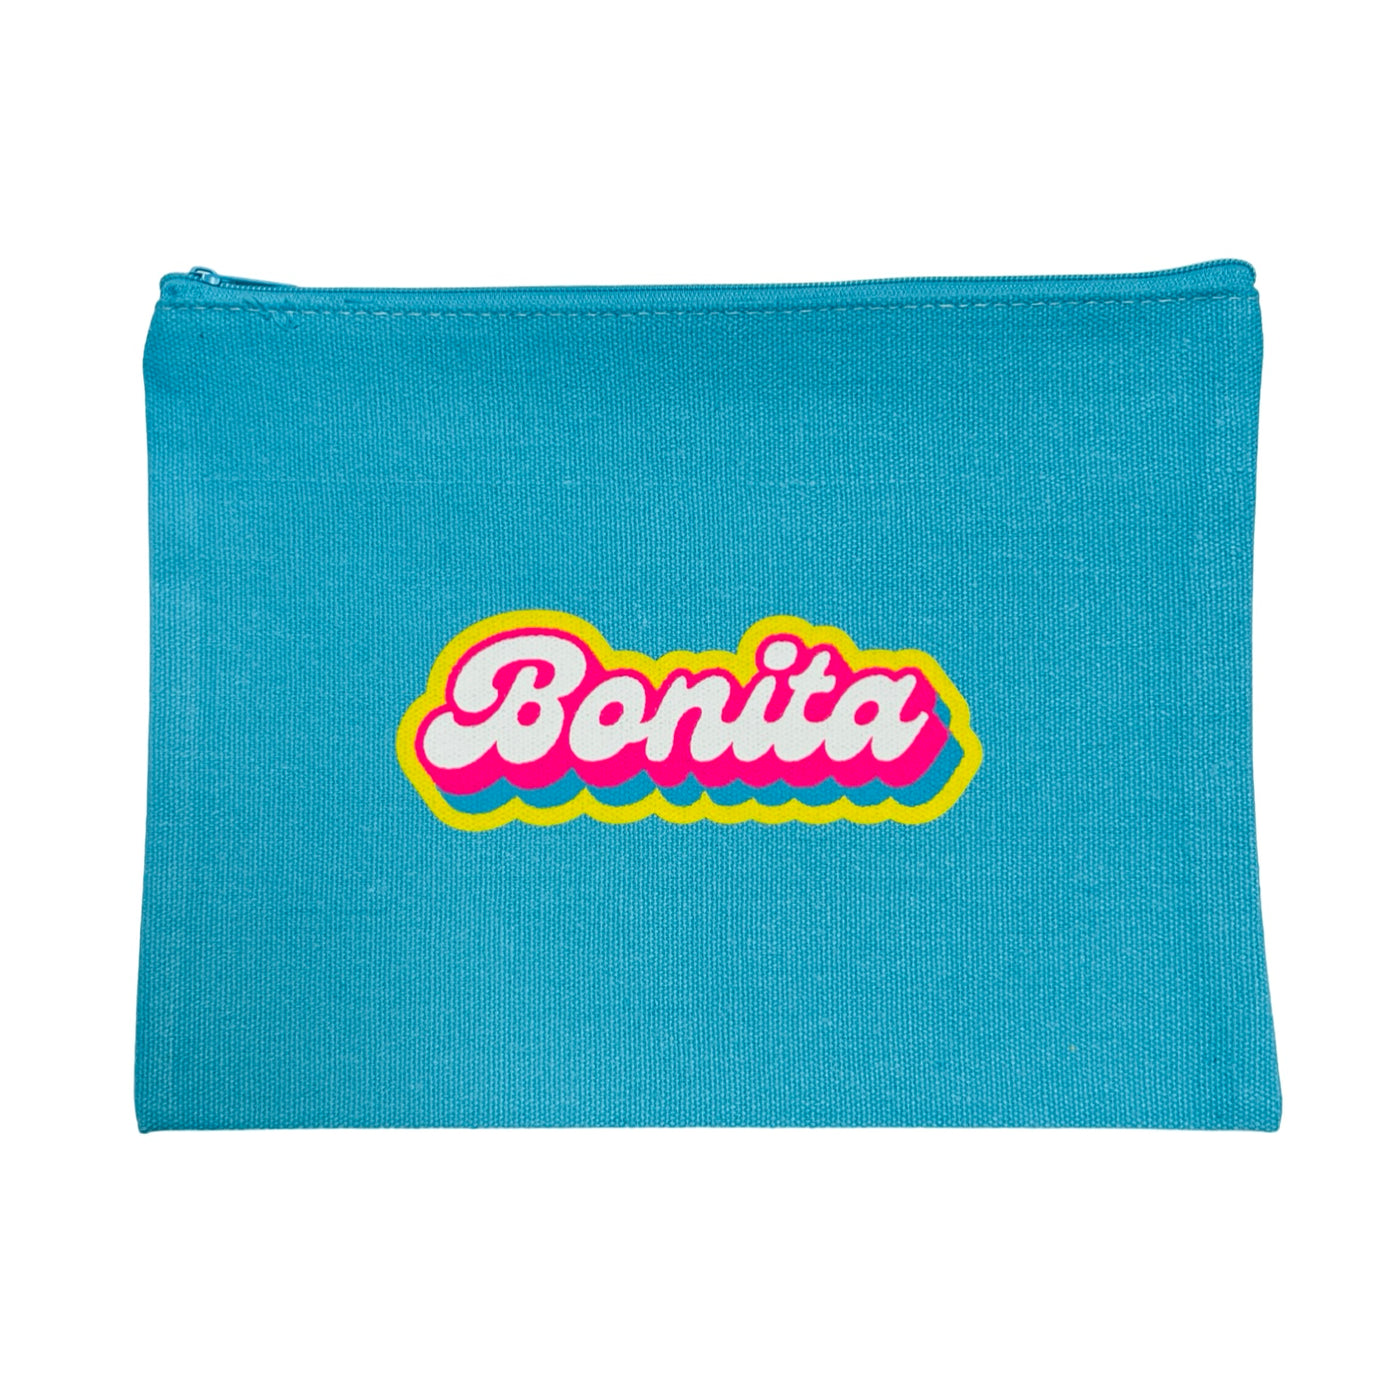 teal canvas zipper pouch with the word Bonita in white, yellow and blue lettering